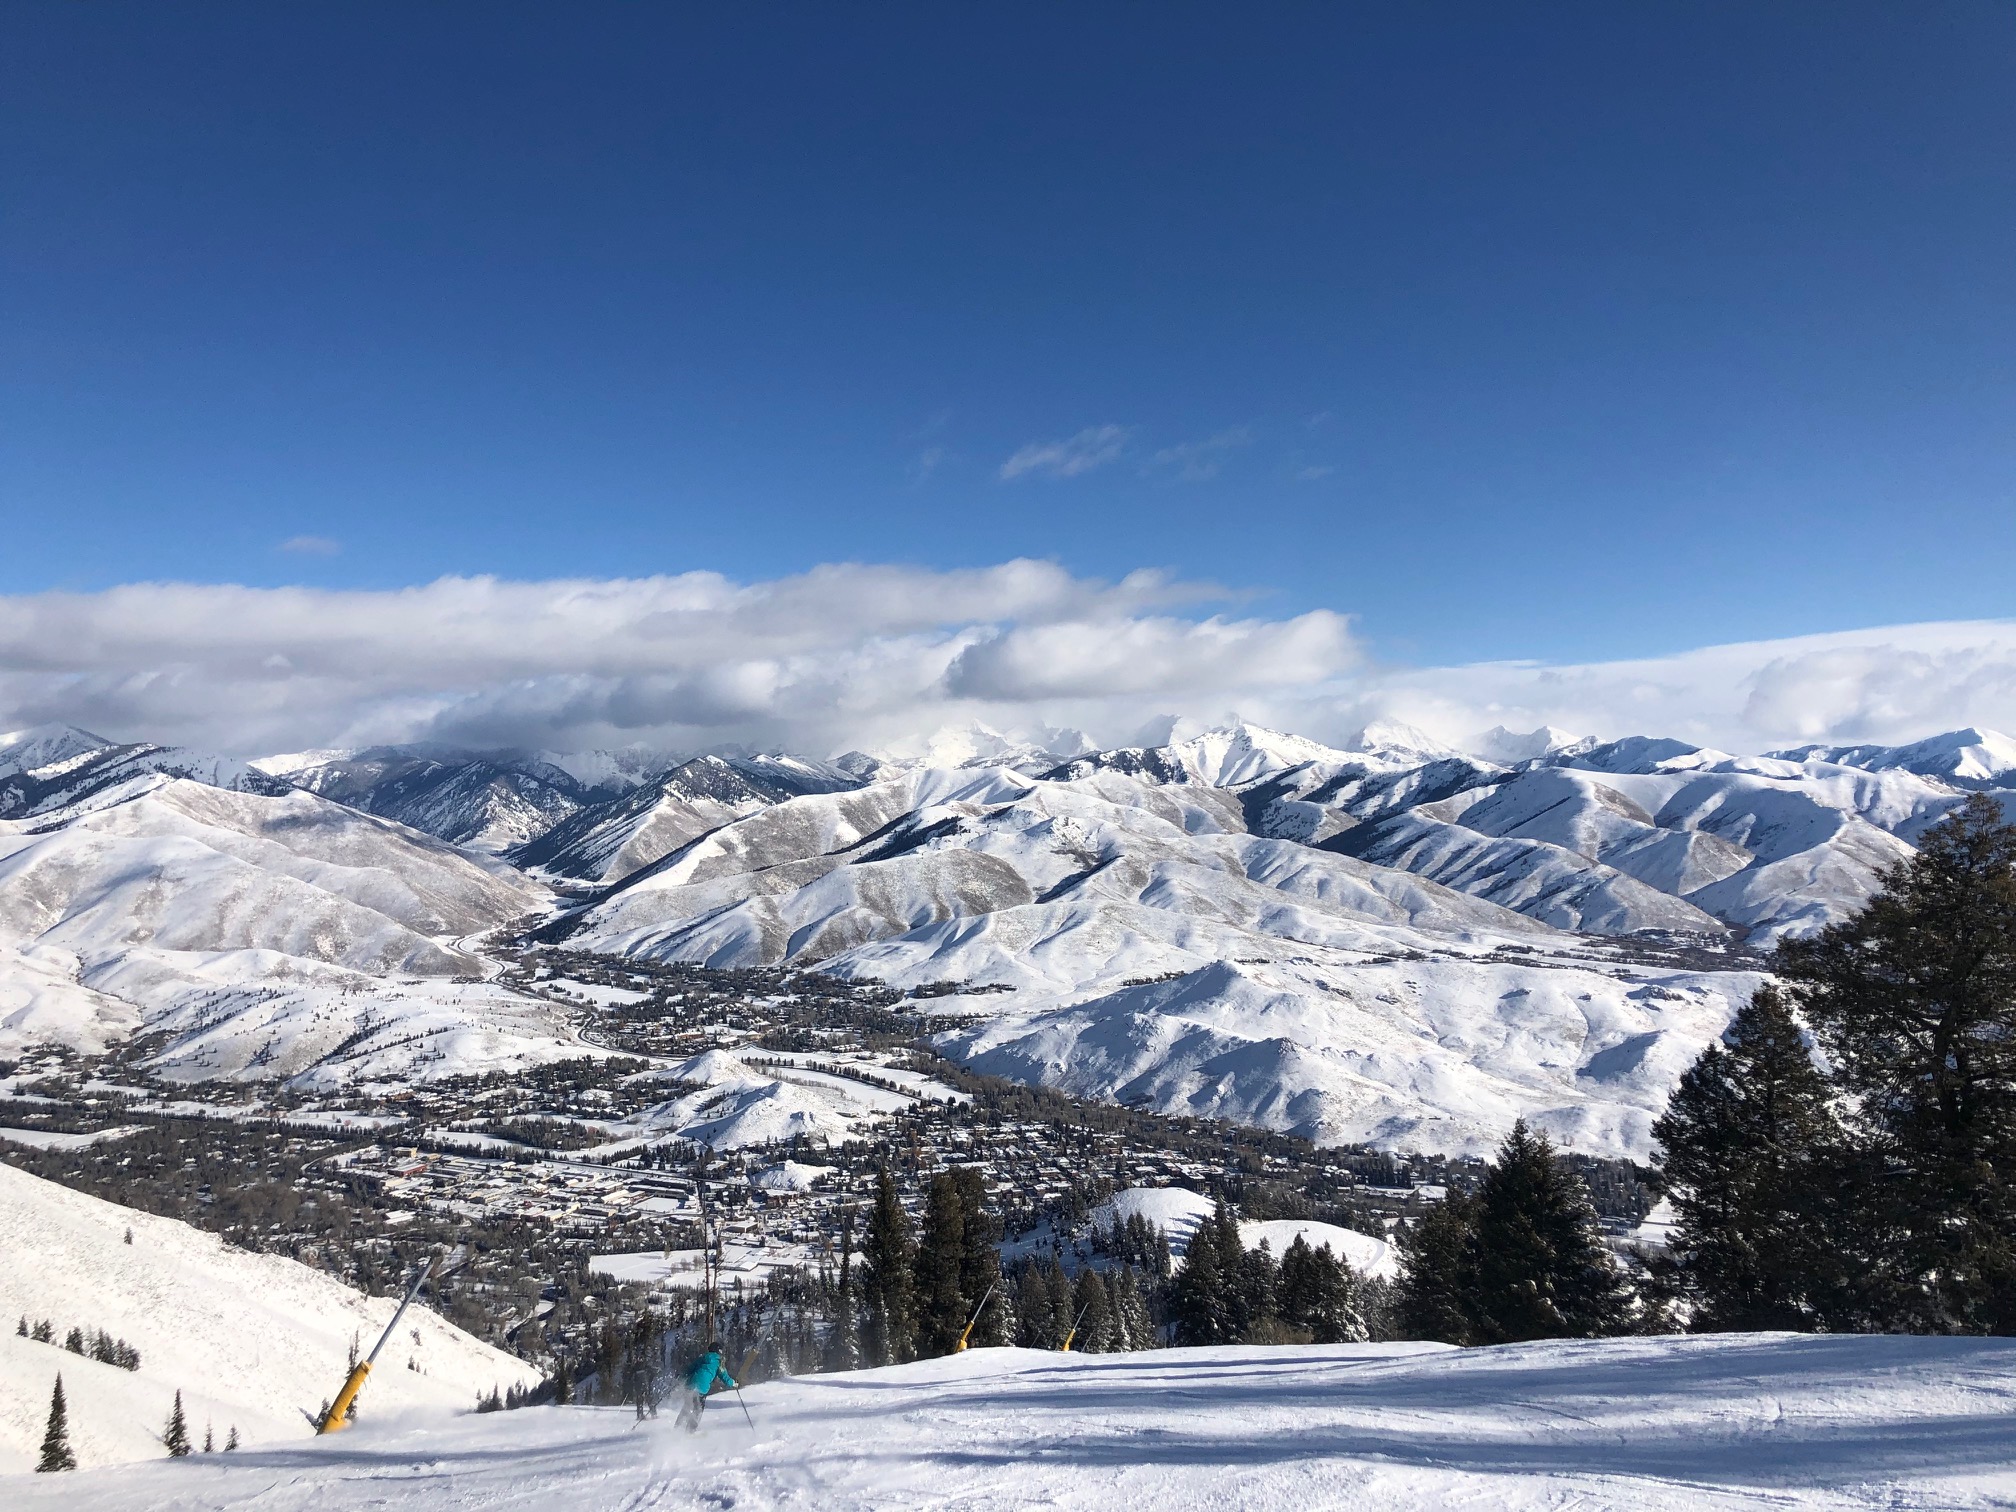 February an Incredible Month to Visit Sun Valley! Sun Valley Hotels